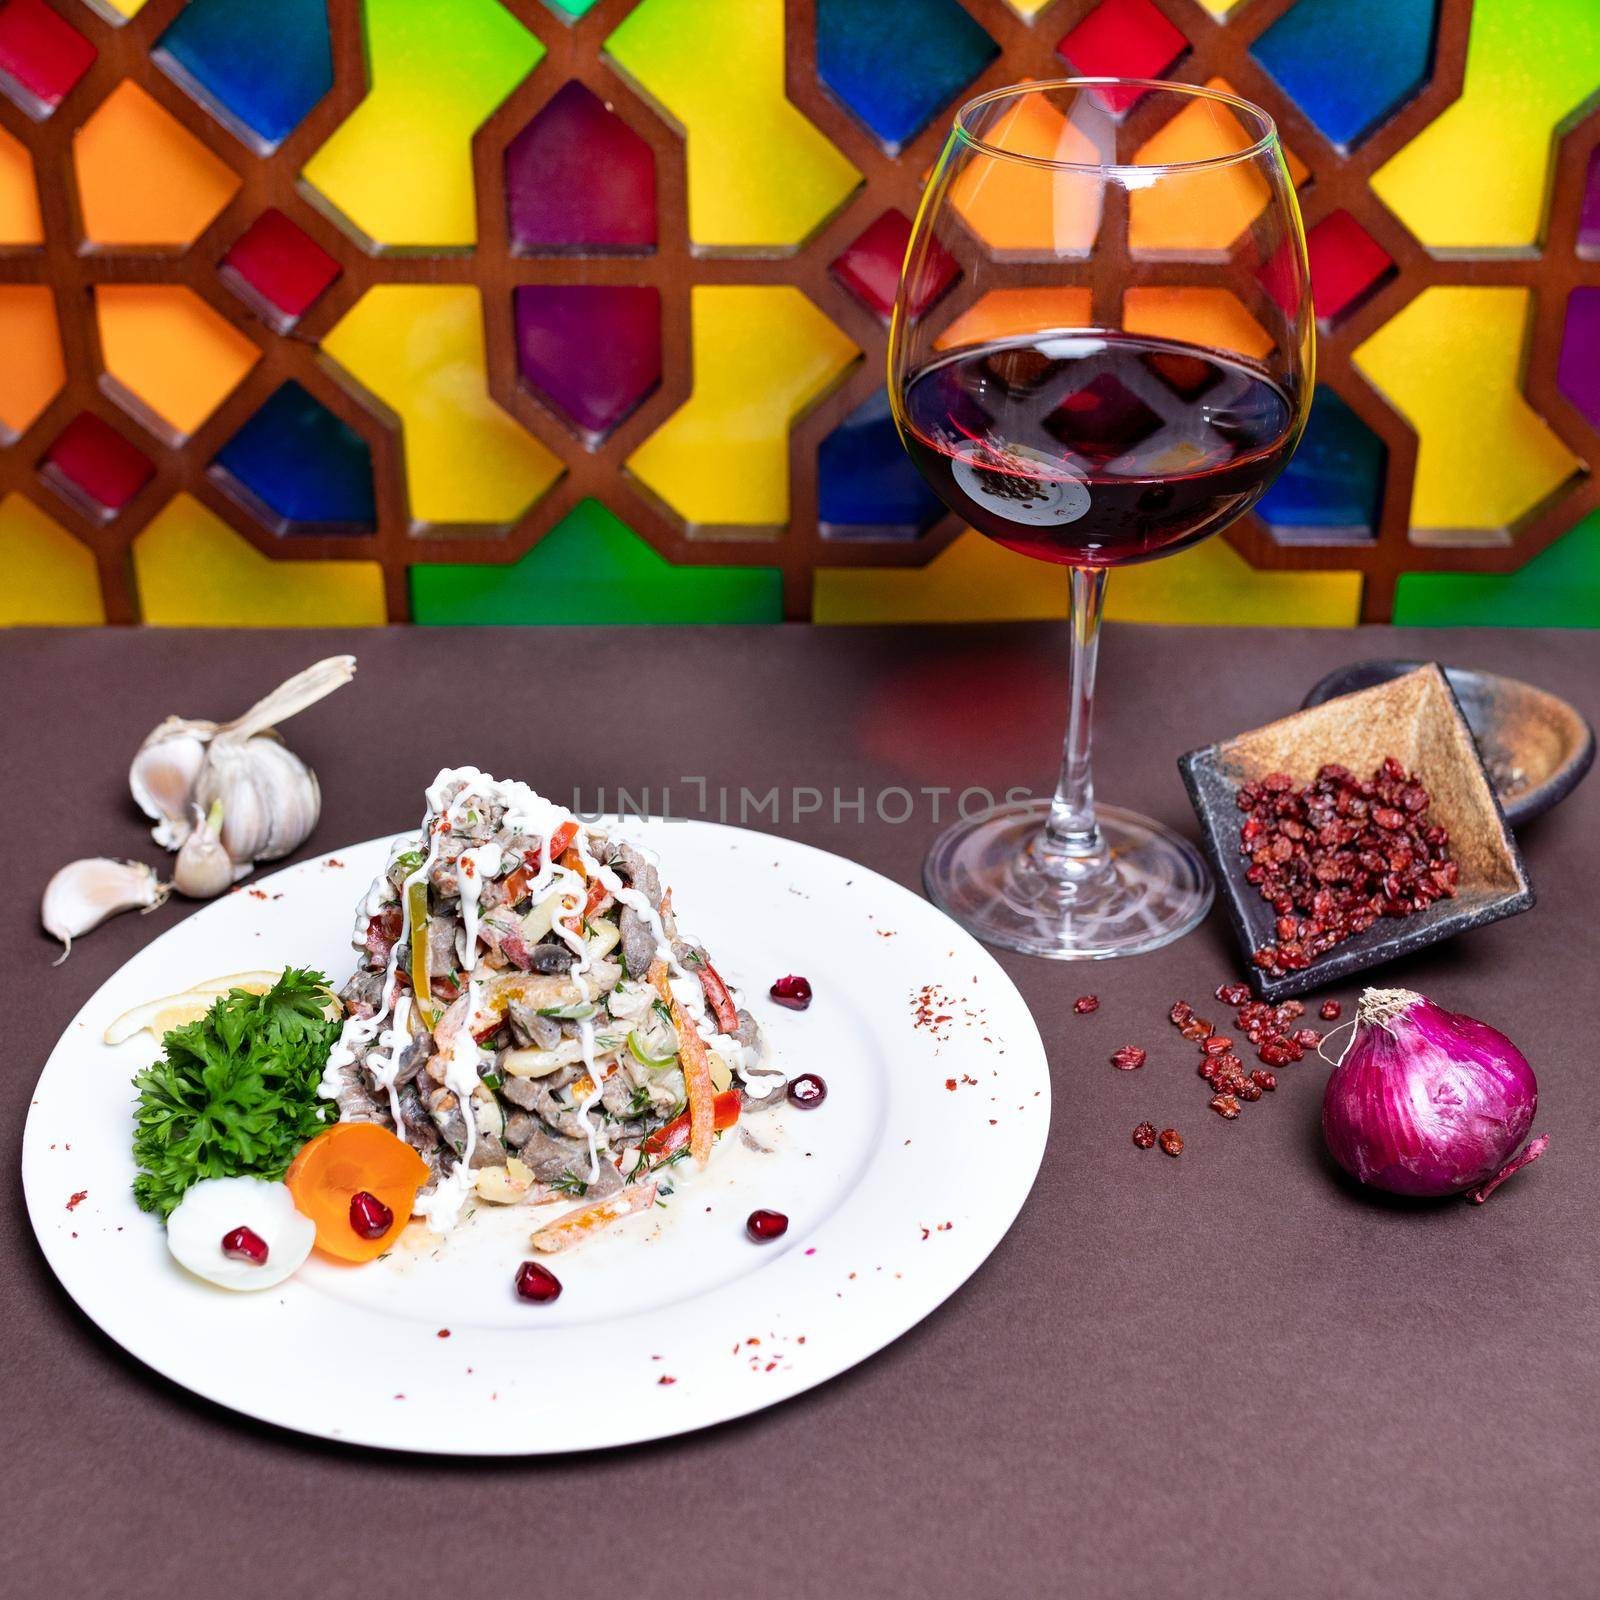 Tasty salad with red wine with colorful background